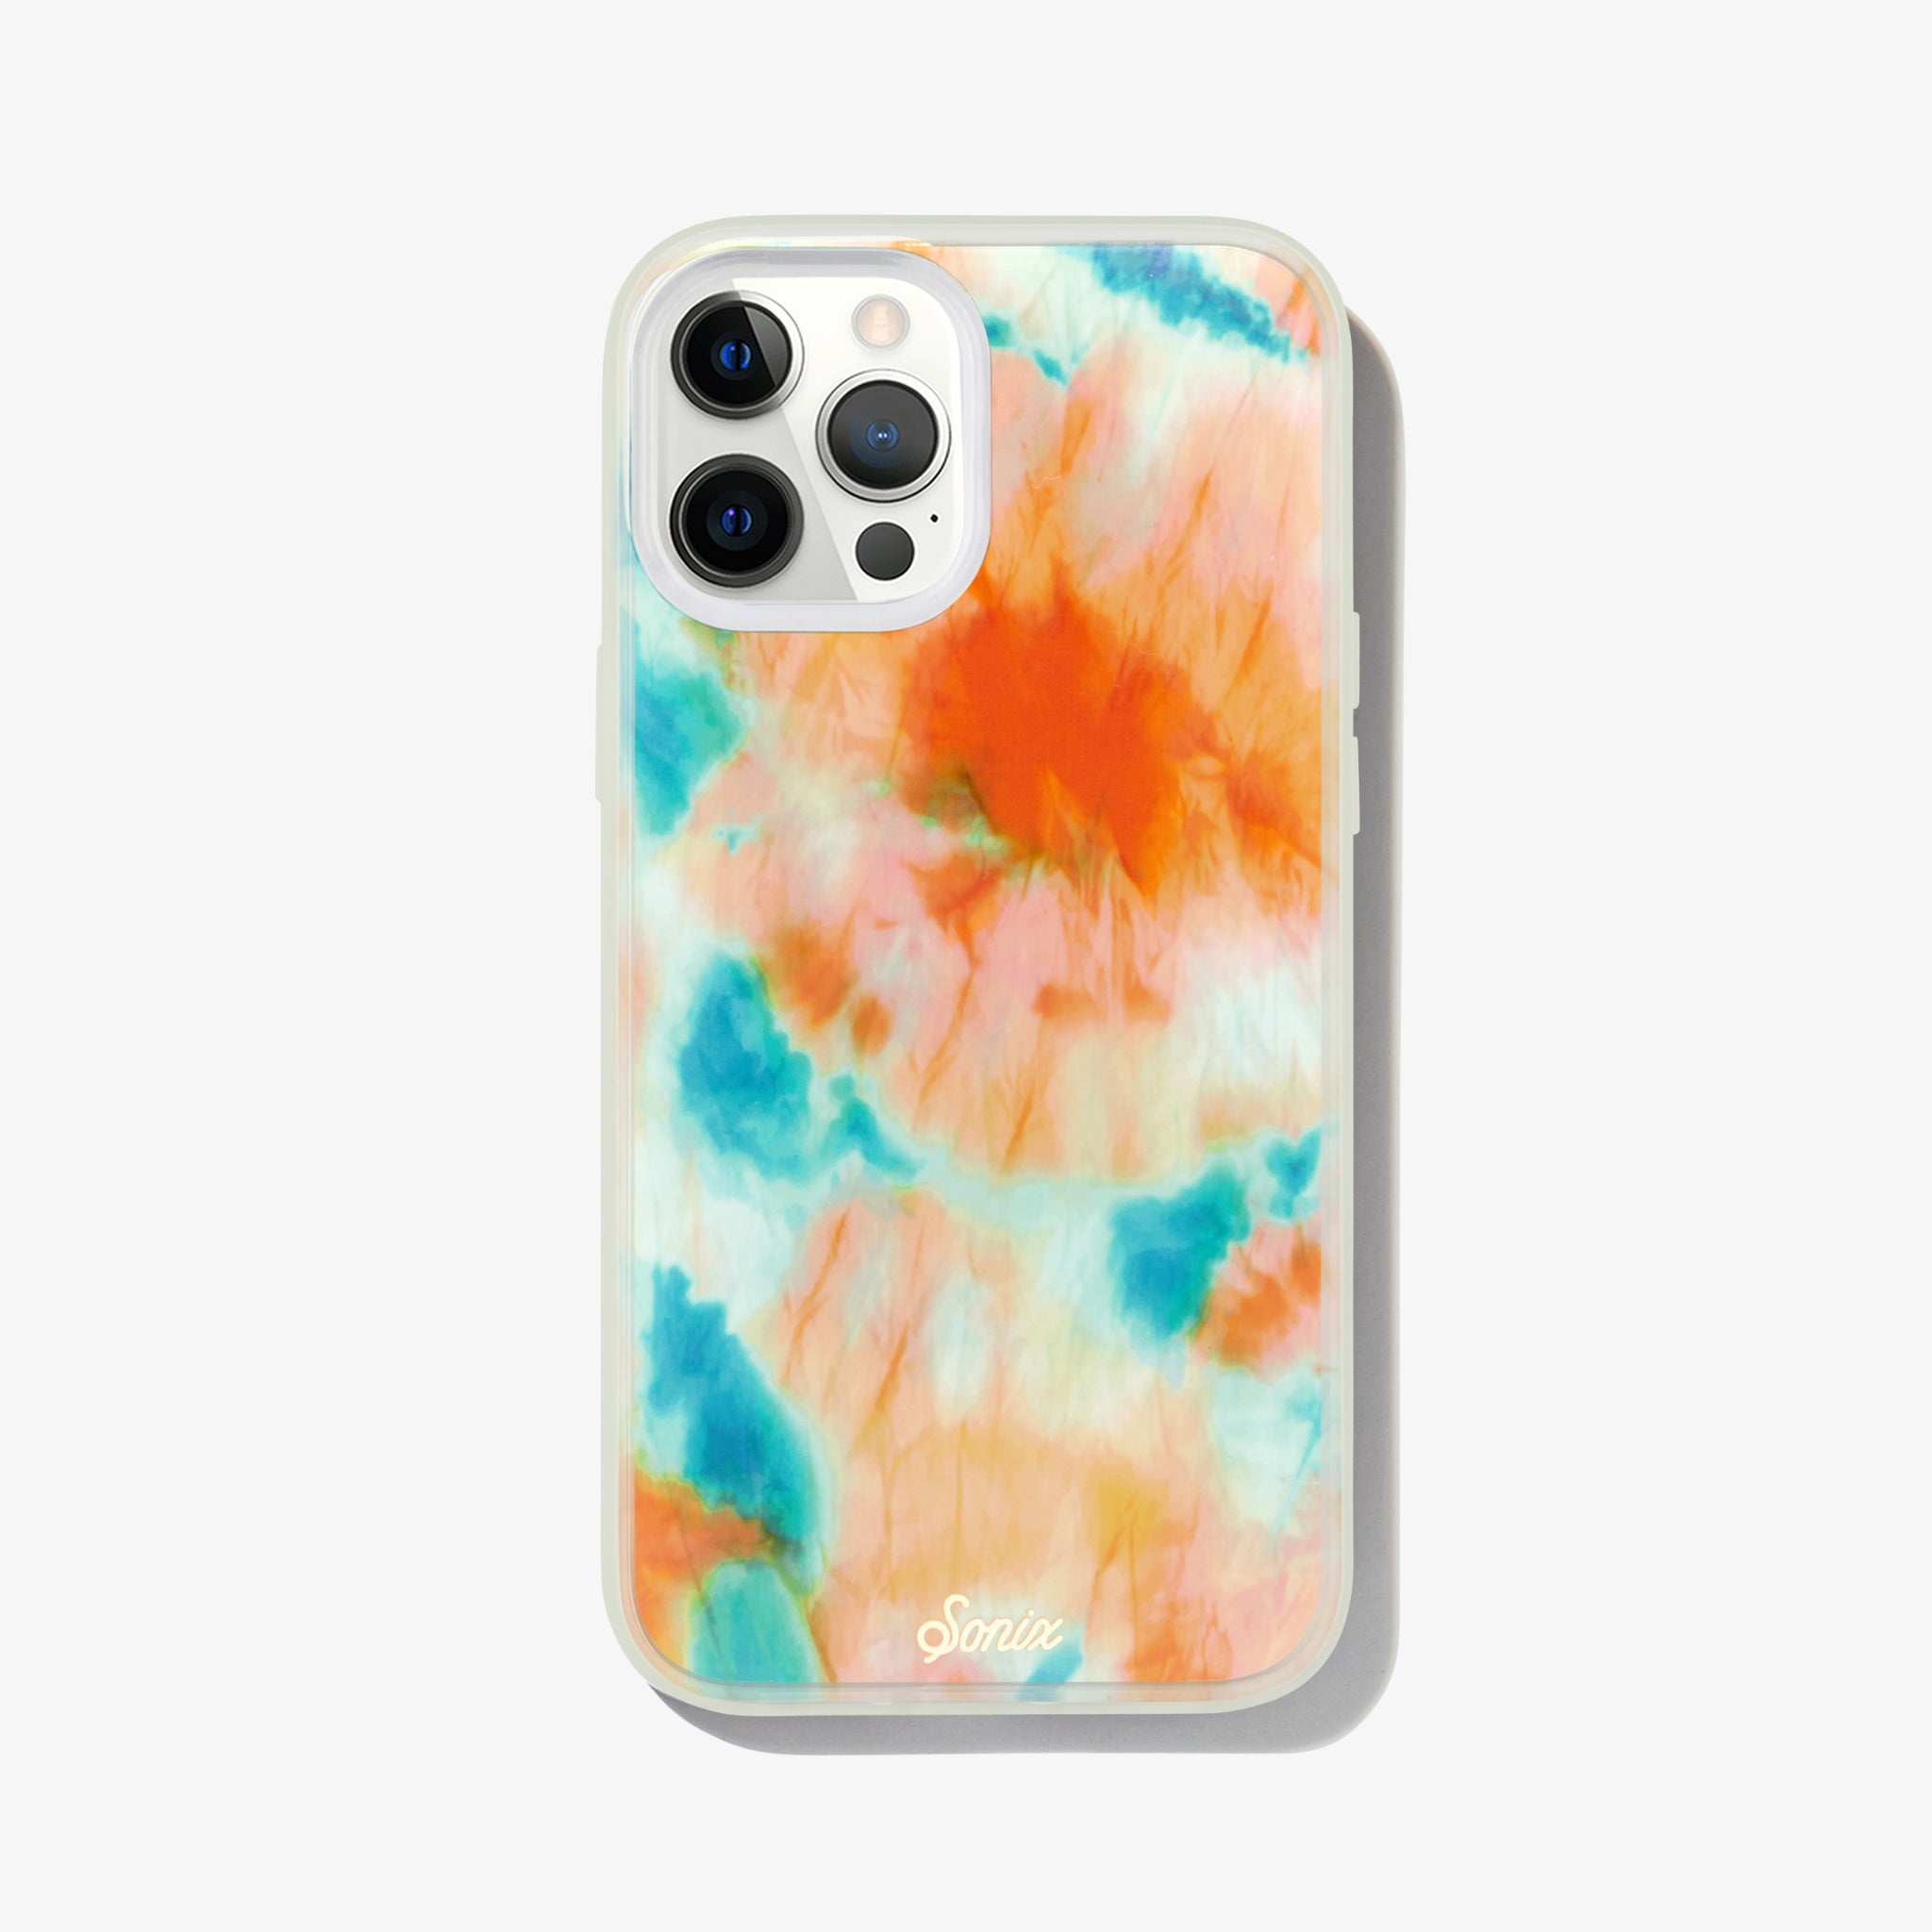 orange and blue tie-dye design that glows in the dark shown on an iphone 12 pro